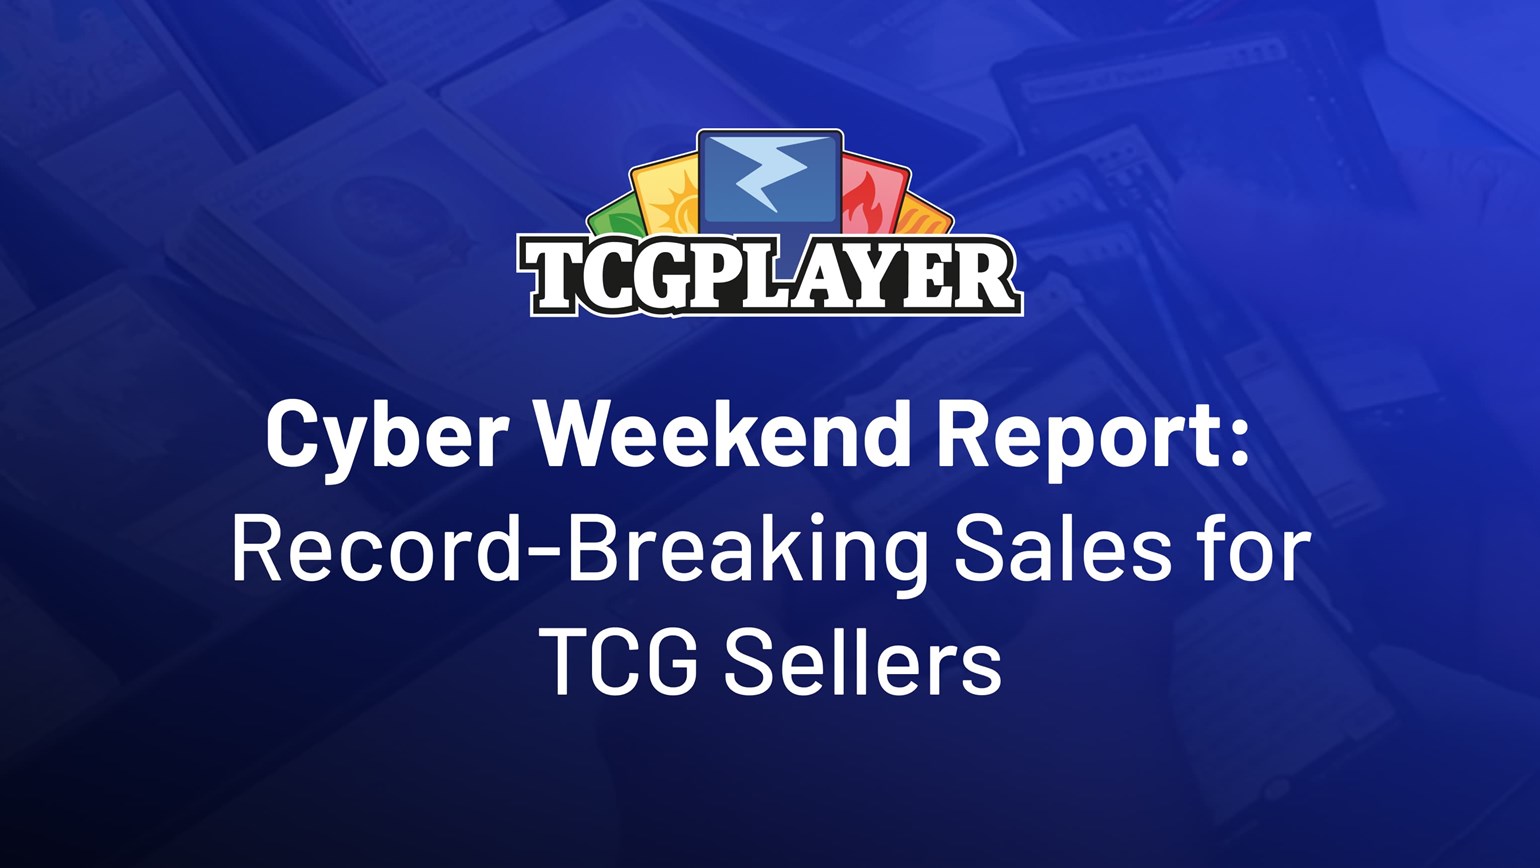 Cyber Weekend Report: Record-Breaking Sales for TCG Sellers